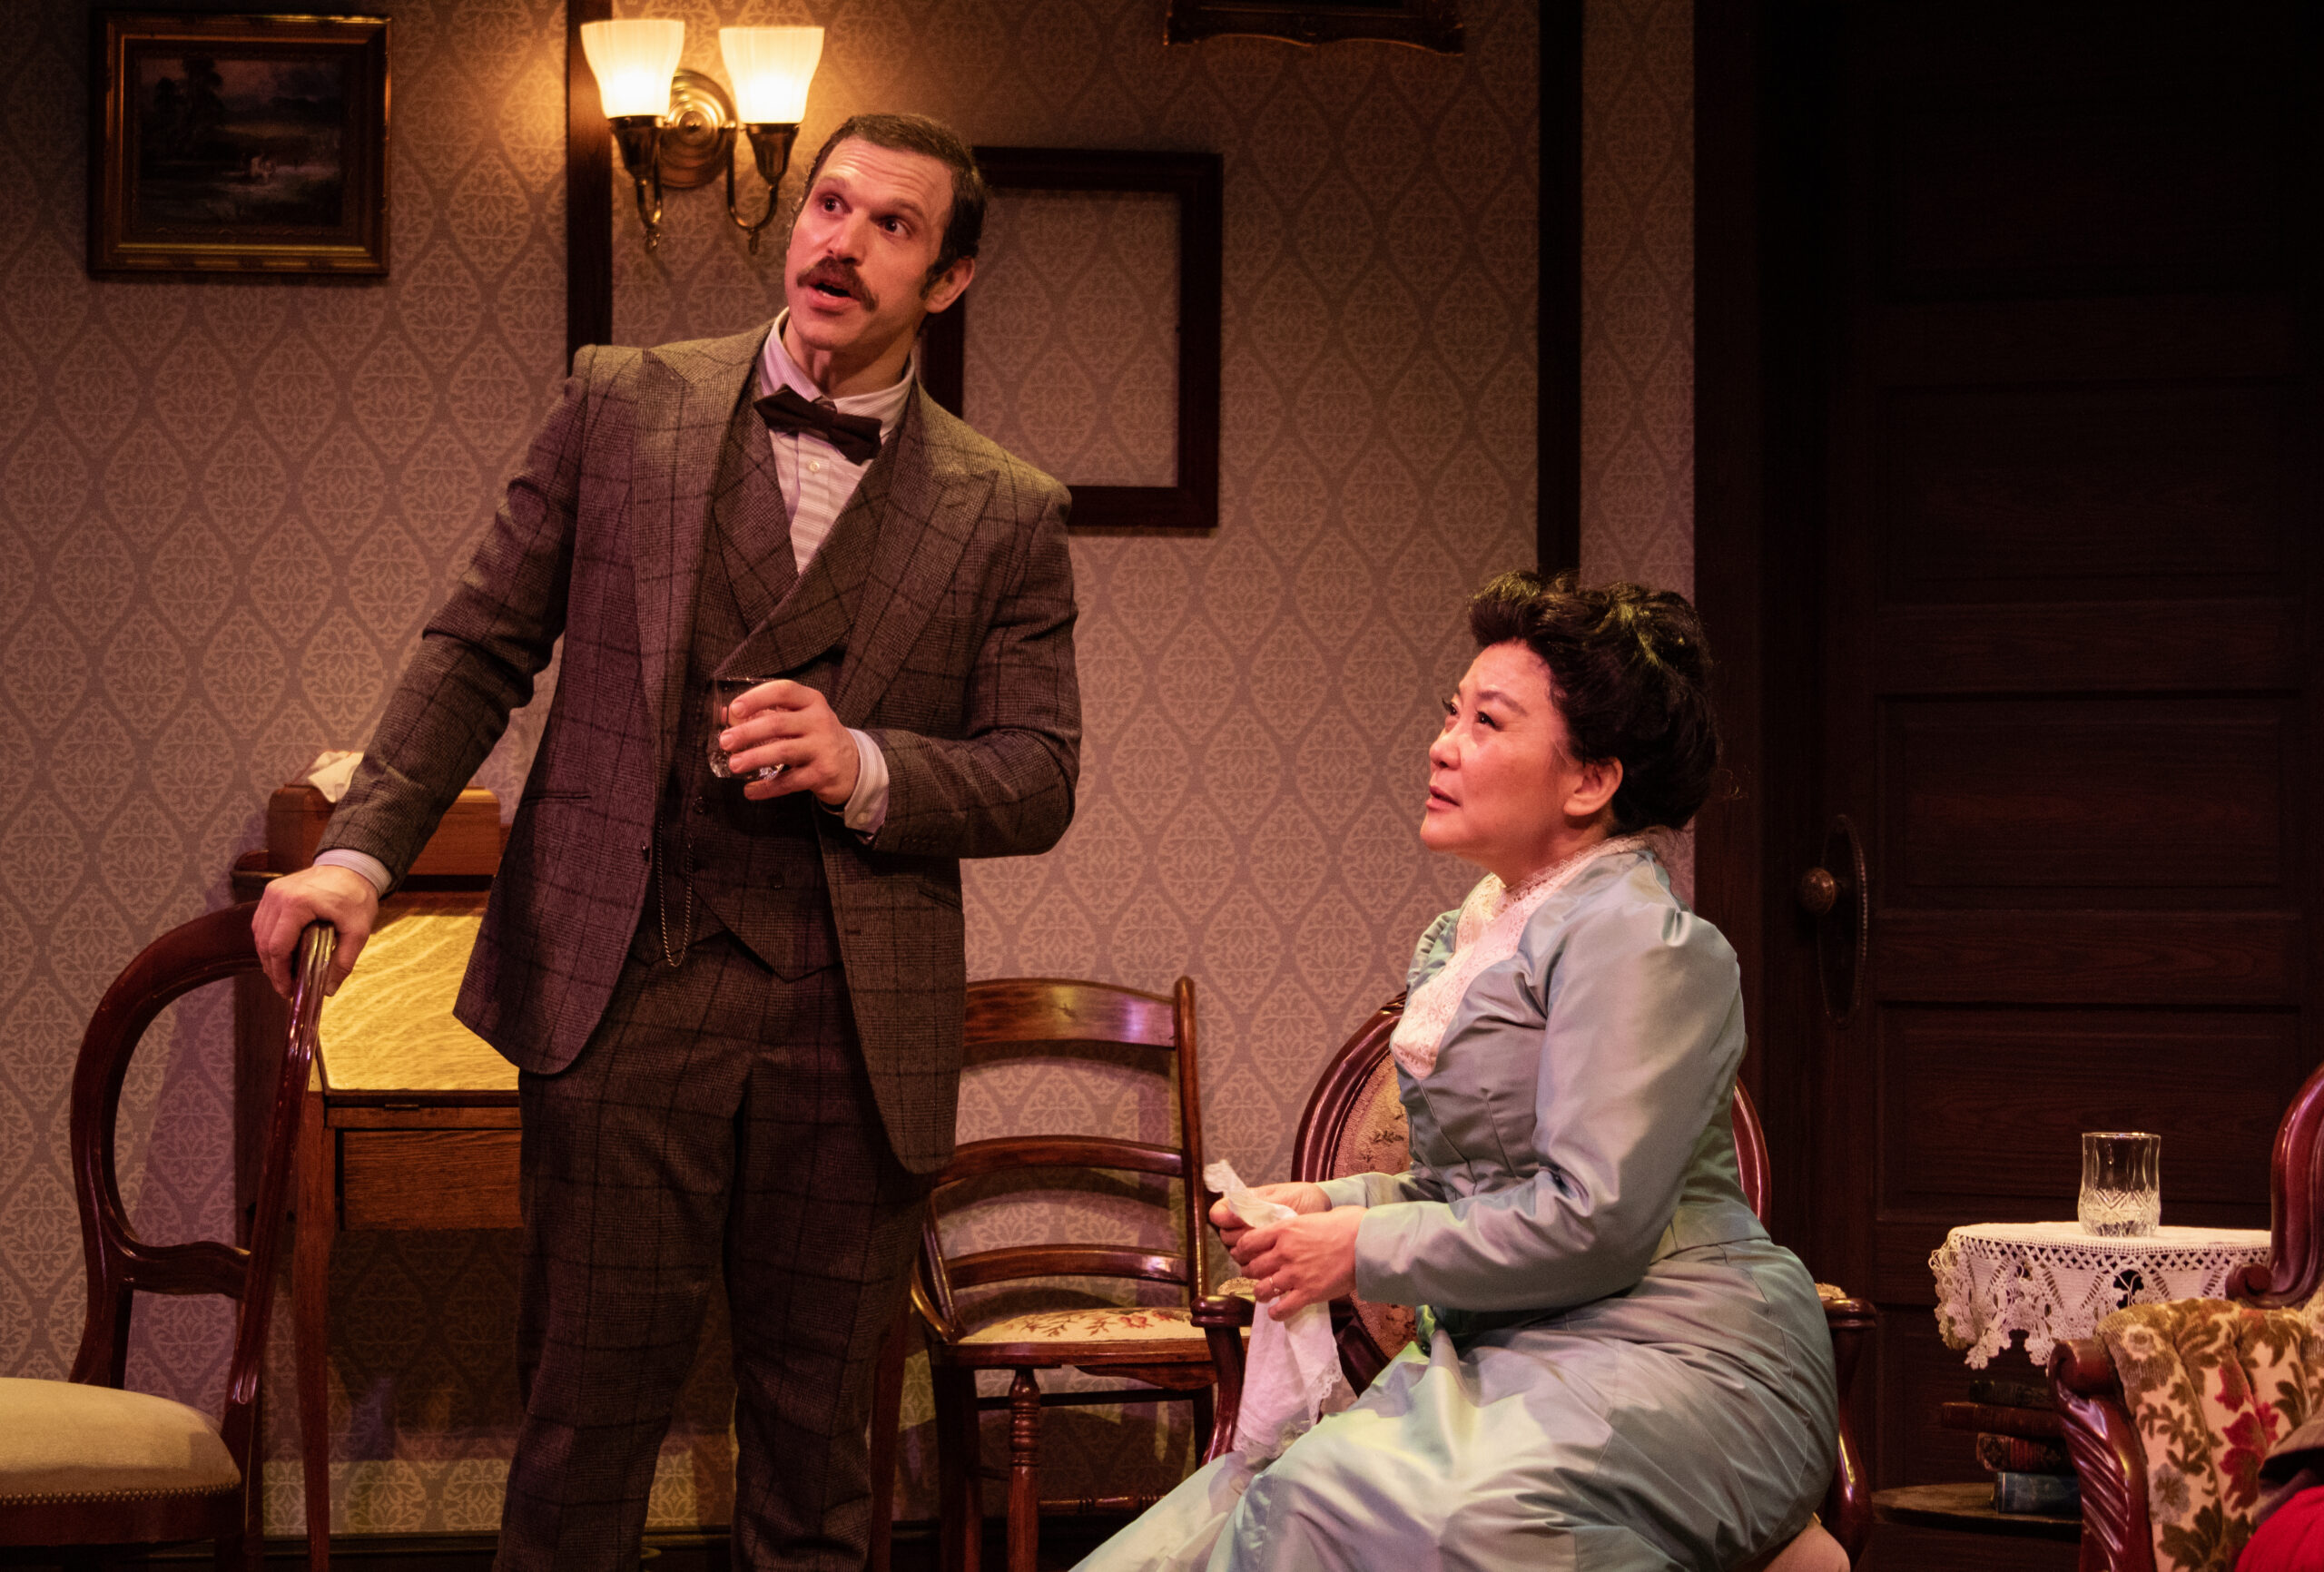 Review Sound Theater’s “Gaslight” Has Strong Design Elements And An